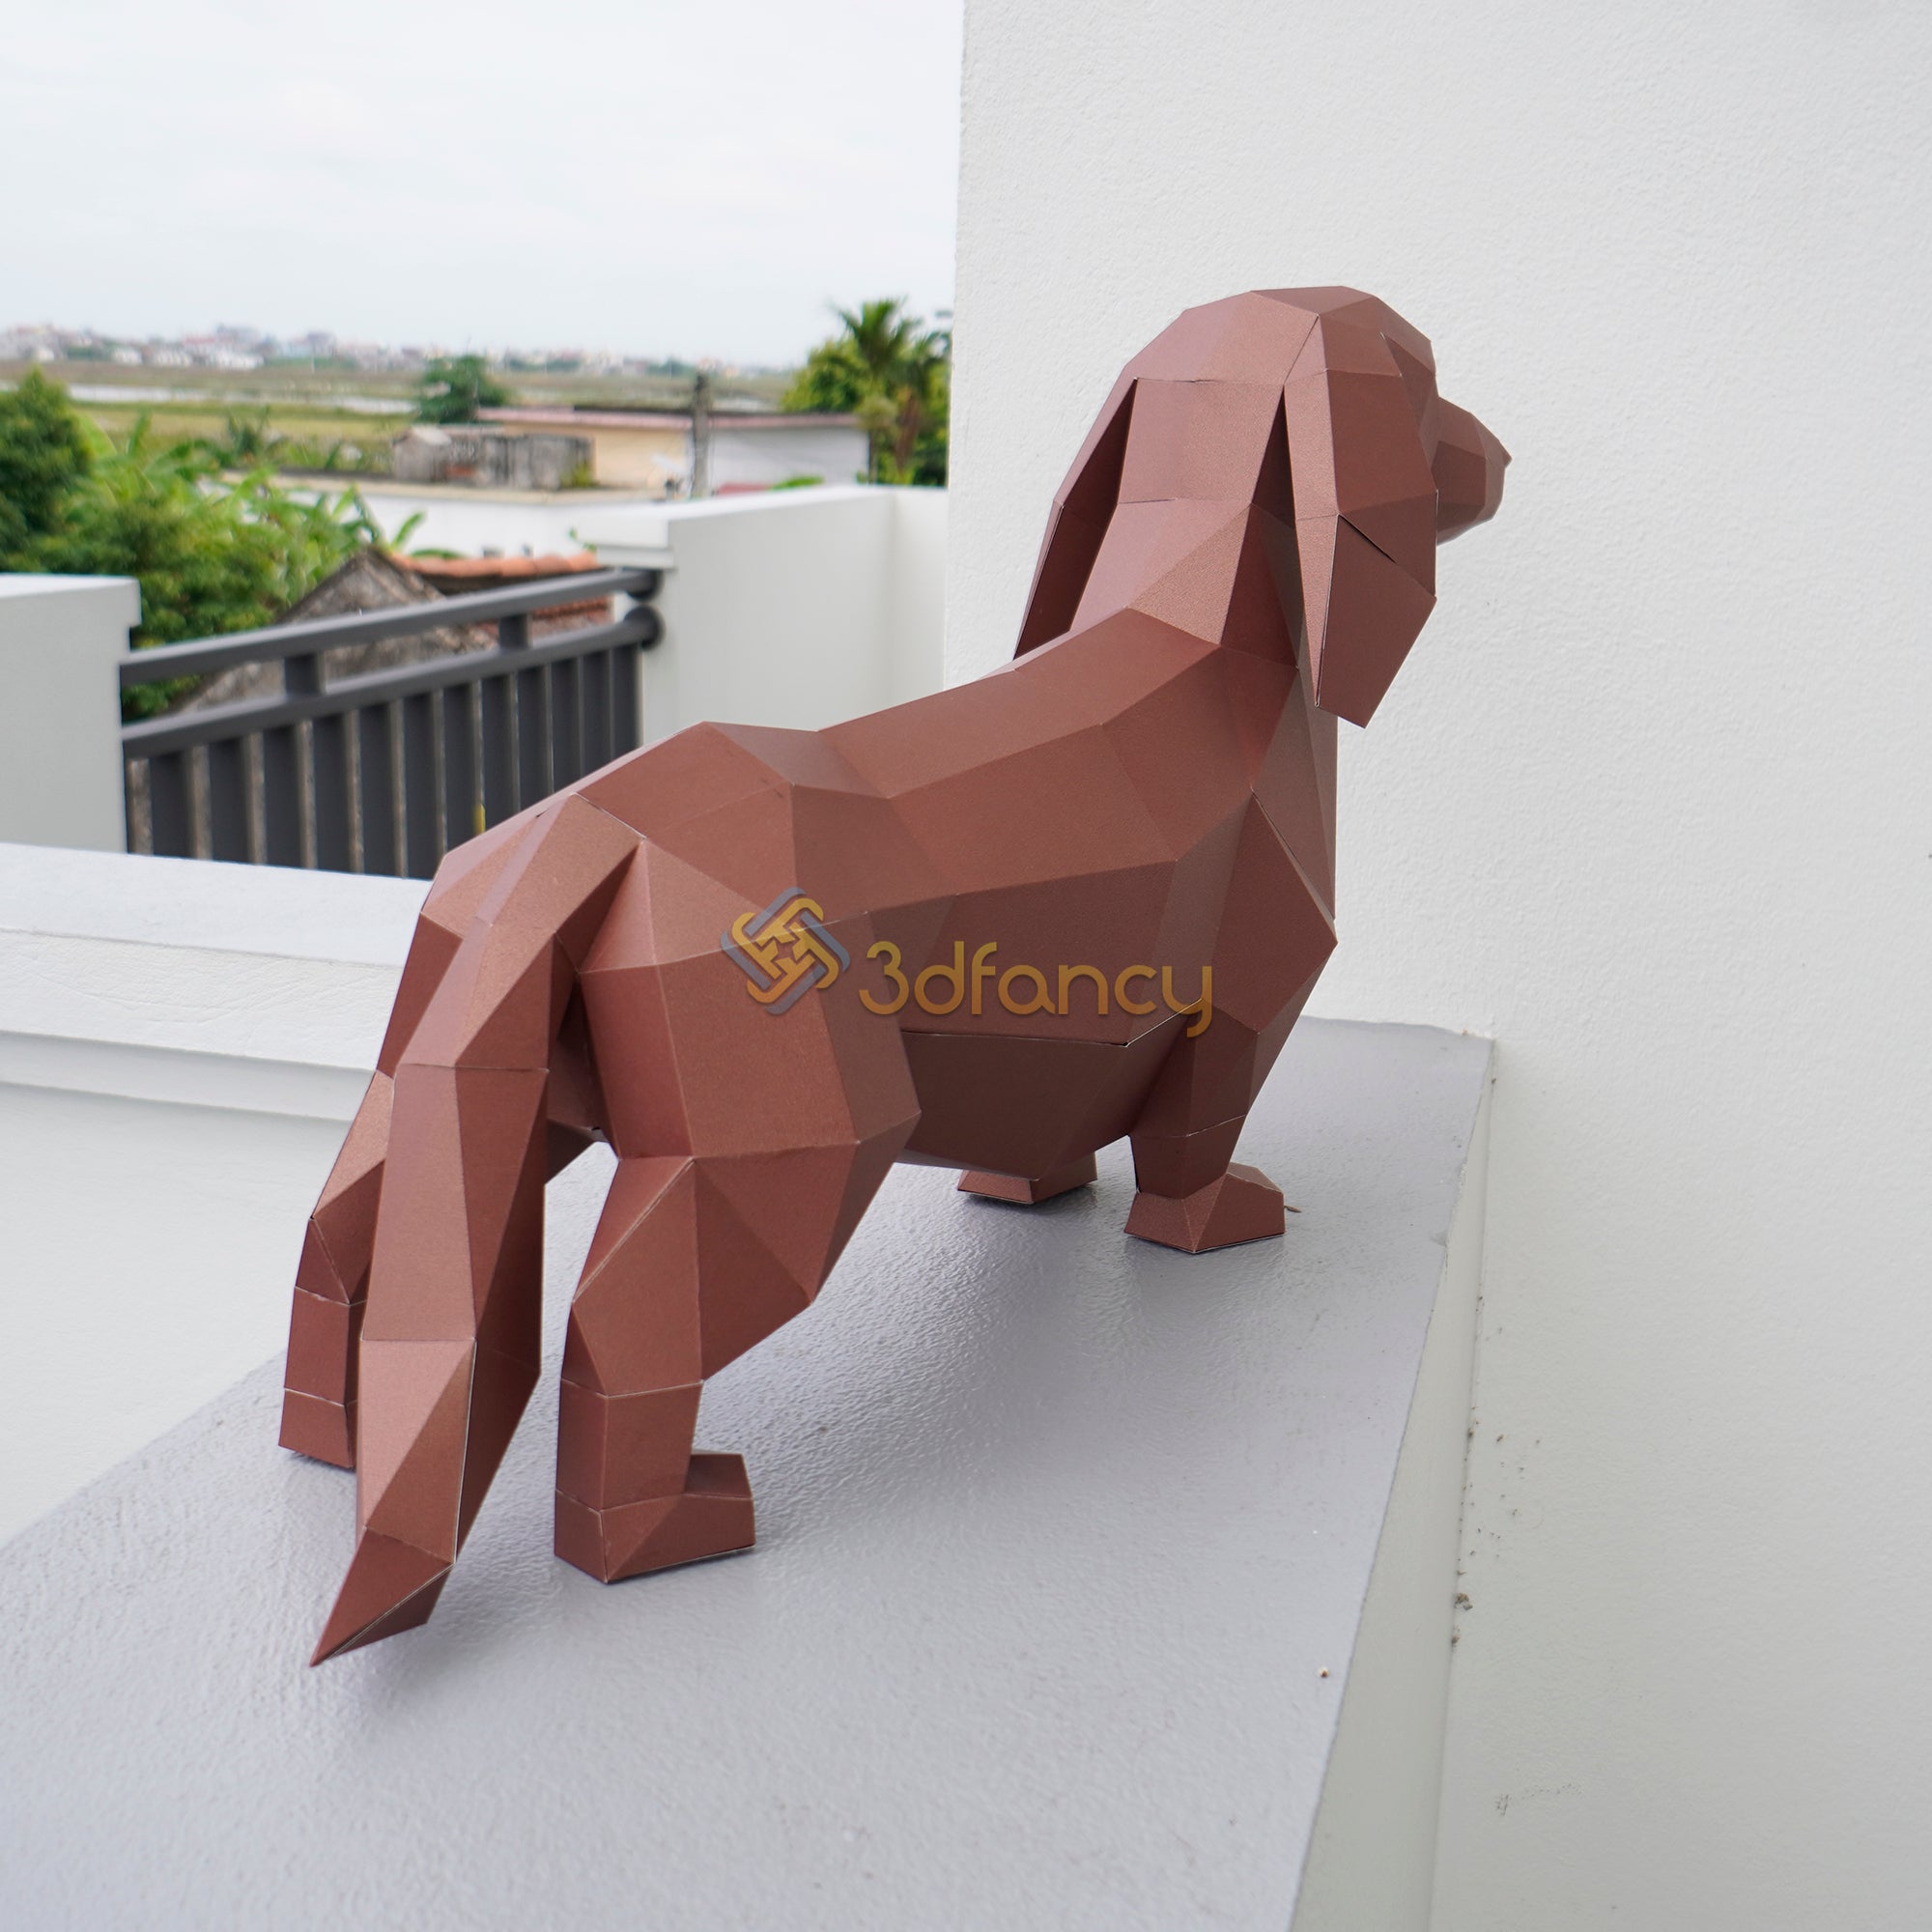 Dachshund Papercraft PDF, 3D SVG Template creating Lowpoly Dog